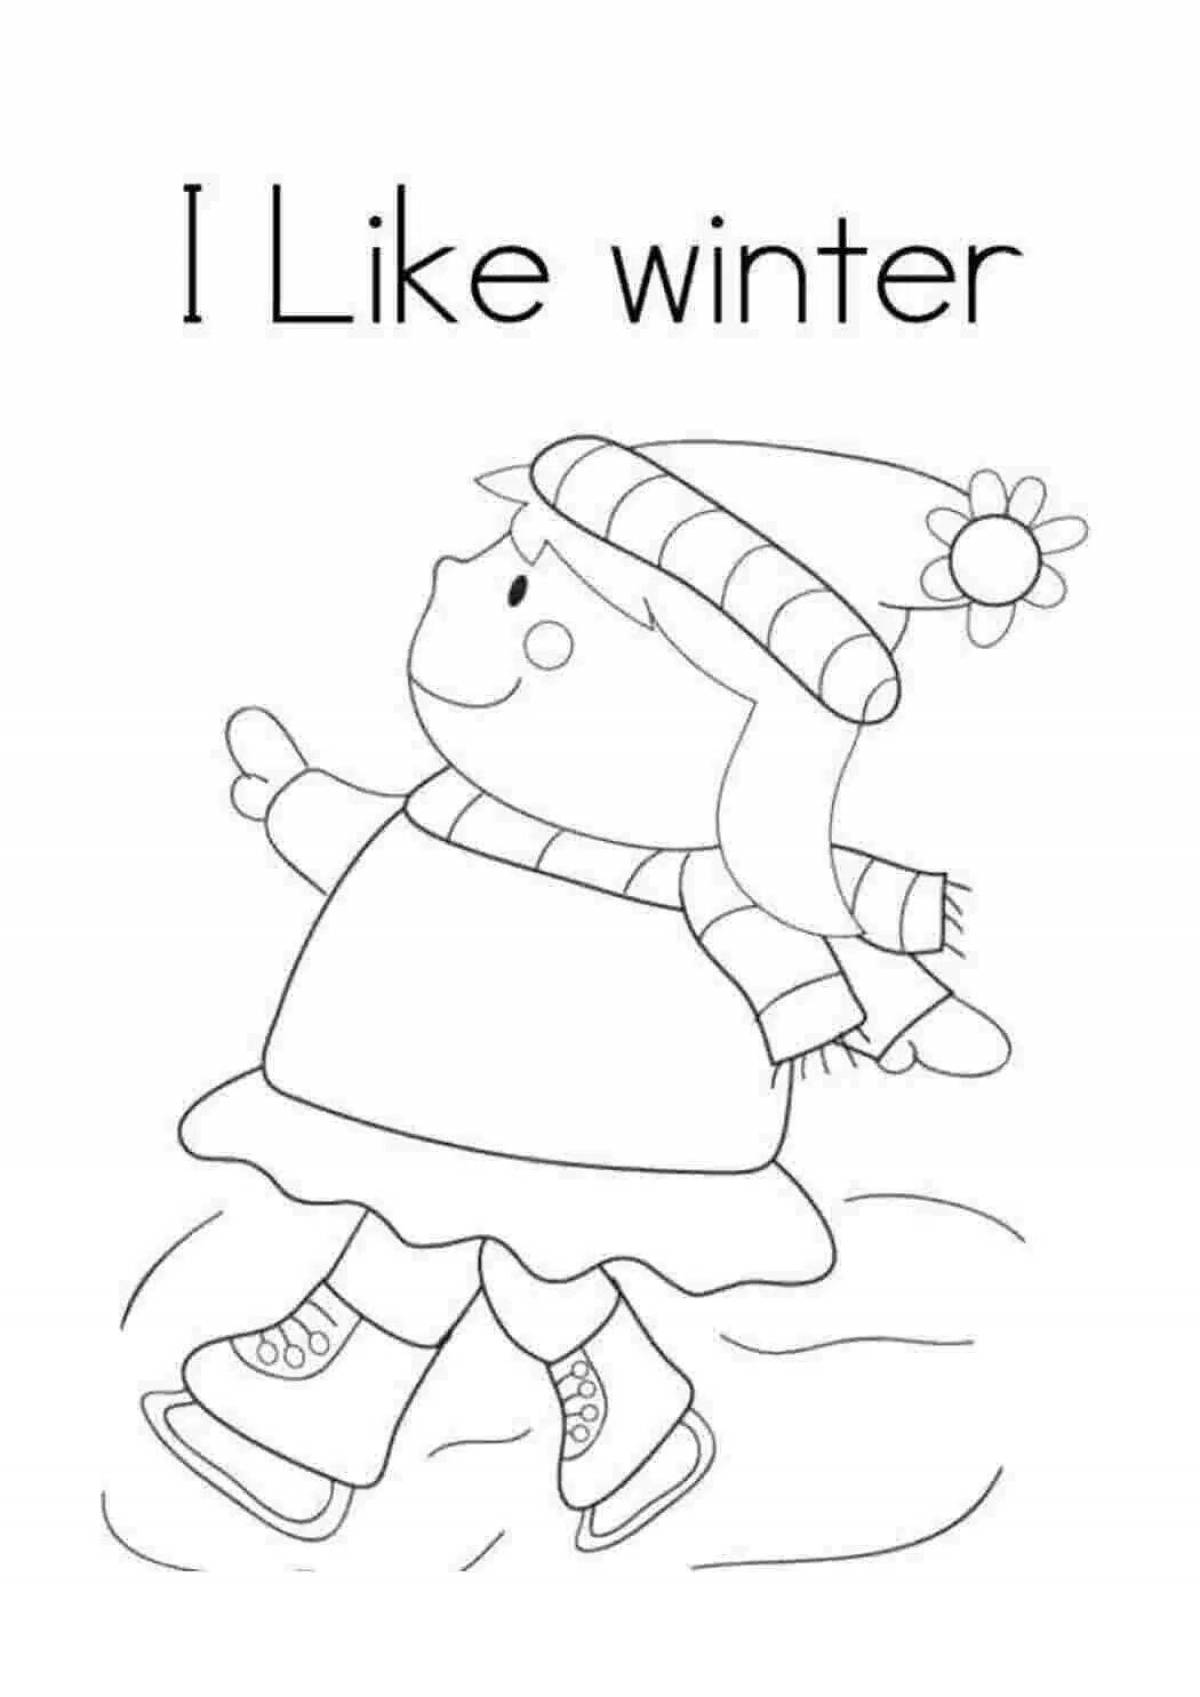 Funny coloring pages of skates for children 5-6 years old